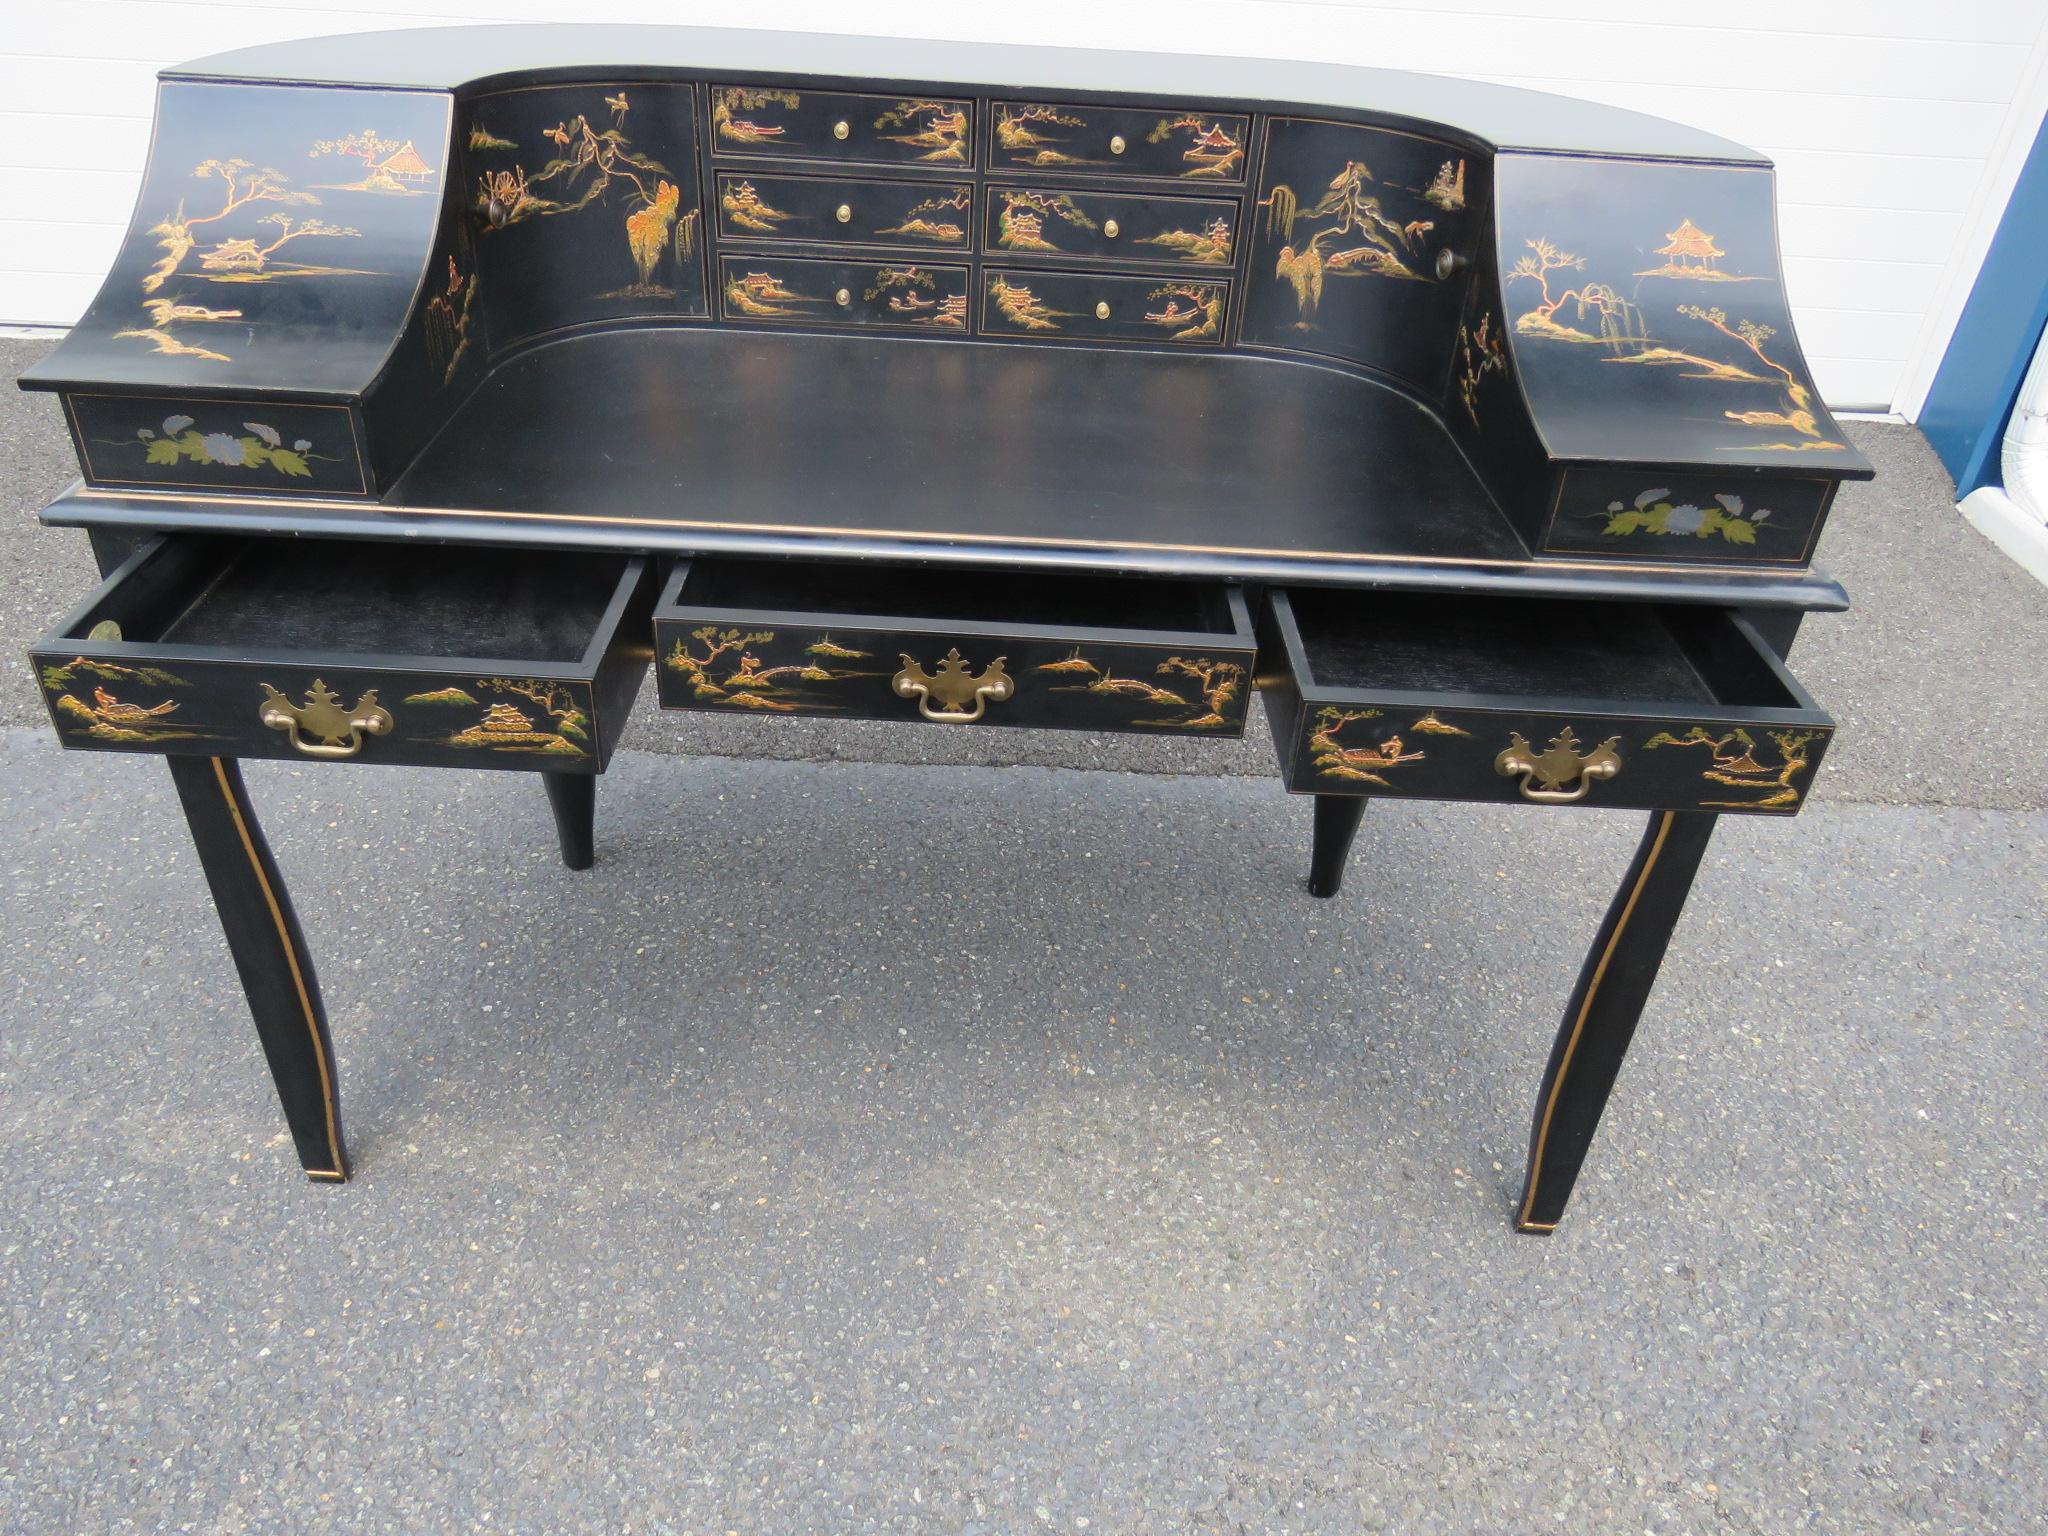 Baker Furniture Co Asian inspired paint decorated Carlton House desk with multiple doors and drawers.